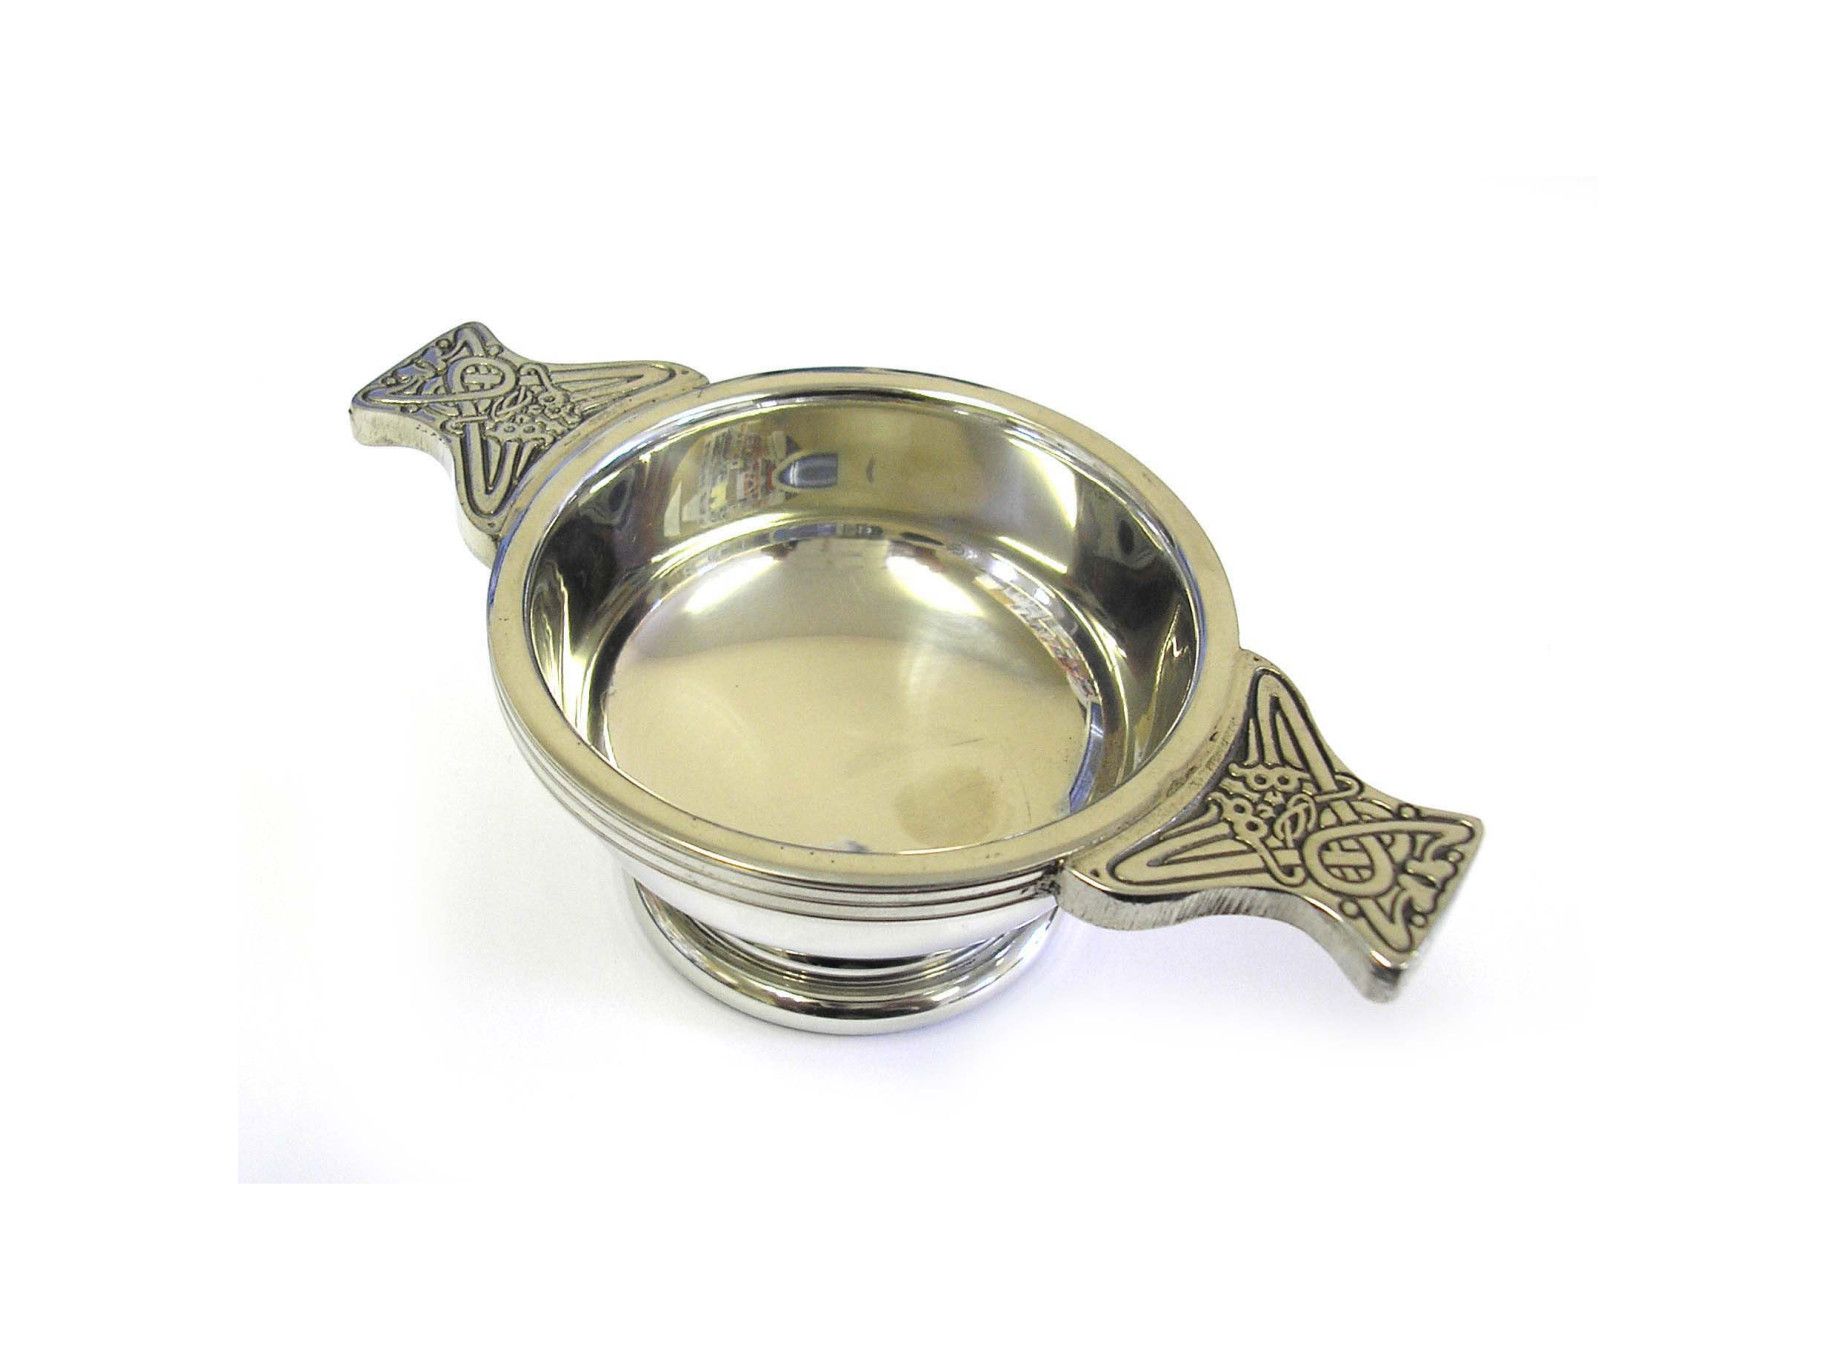 Celtic Design Quaich in Pewter Small- 7cms (2.75")